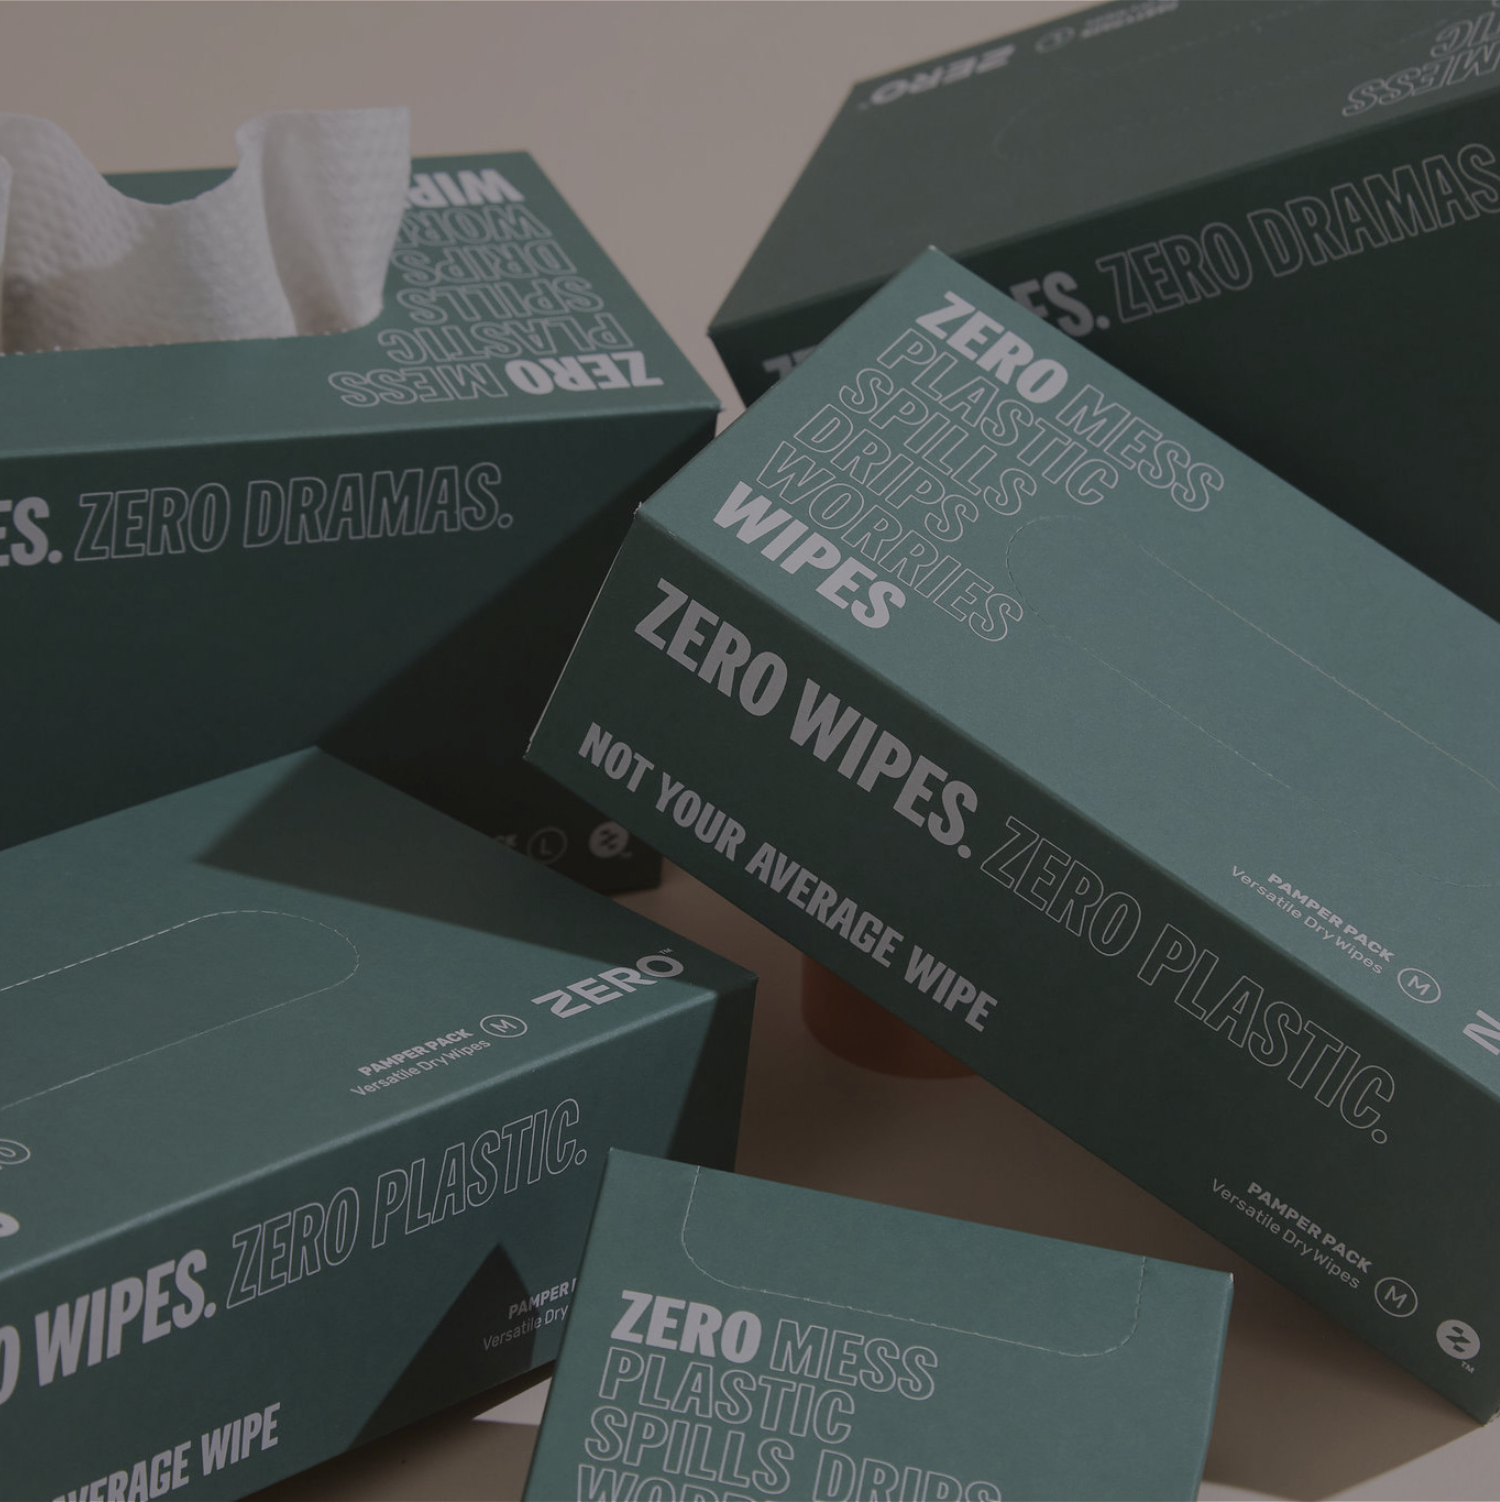 dry wipes, dry wipes for baby, dry wipes for adults, babyu dry wipes, dry wipes for cleaning, eco friendly baby wipes, soft dry wipes, baby wet wipes, dry tissue wipes, biodegradable baby wipes, tissue wipes, makeup wipe, soft makeup wipe, biodegradable makeup wipe